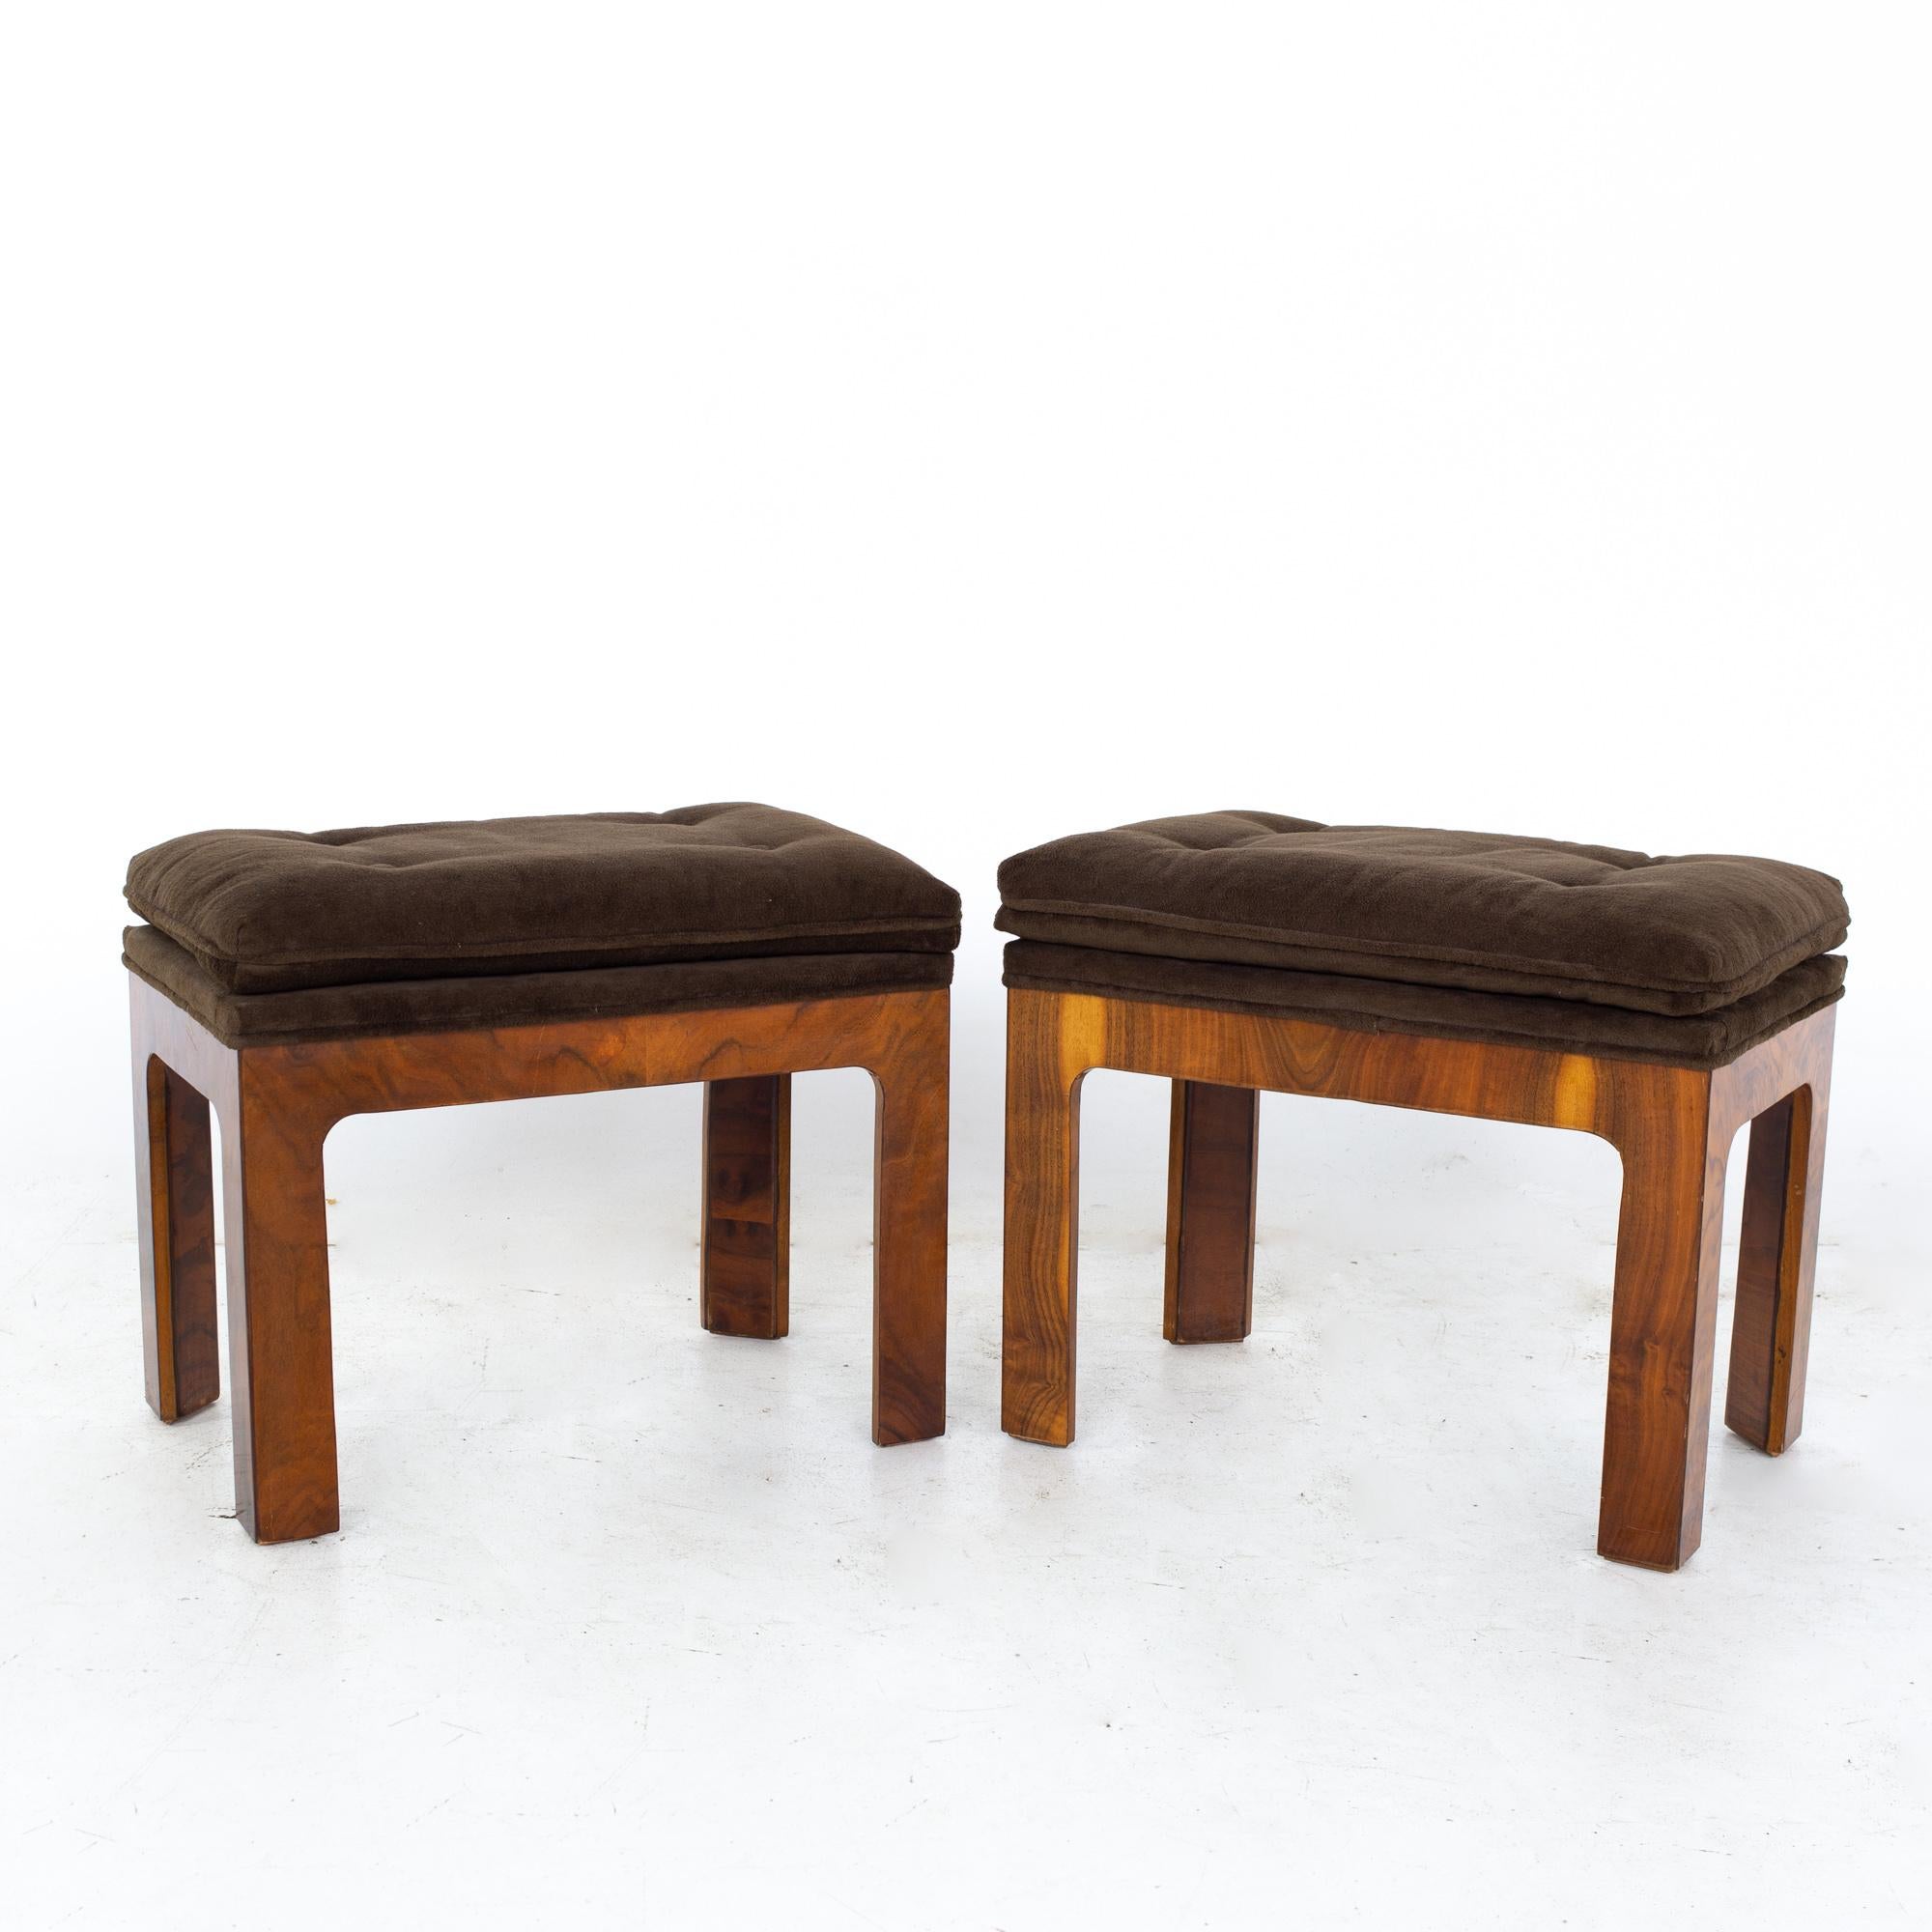 mid century burlwood bench stool ottomans - a pair
Each ottoman measures: 22 wide x 14 deep x 18 high, with a seat height of 18 inches

All pieces of furniture can be had in what we call restored vintage condition. That means the piece is